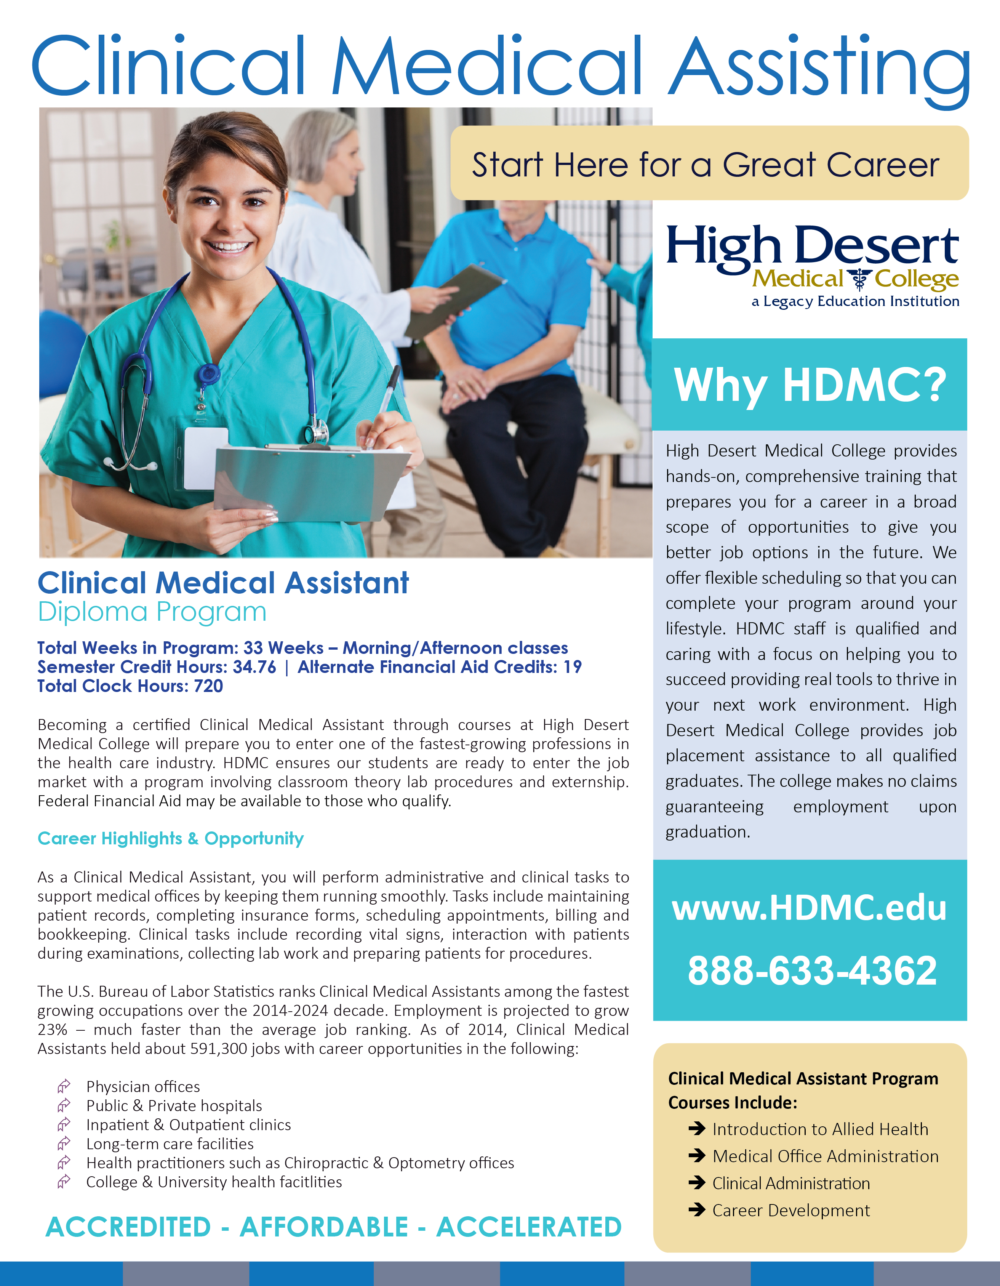 HDMC Clinical Medical Assisting Flyer  July 2022 web 01 